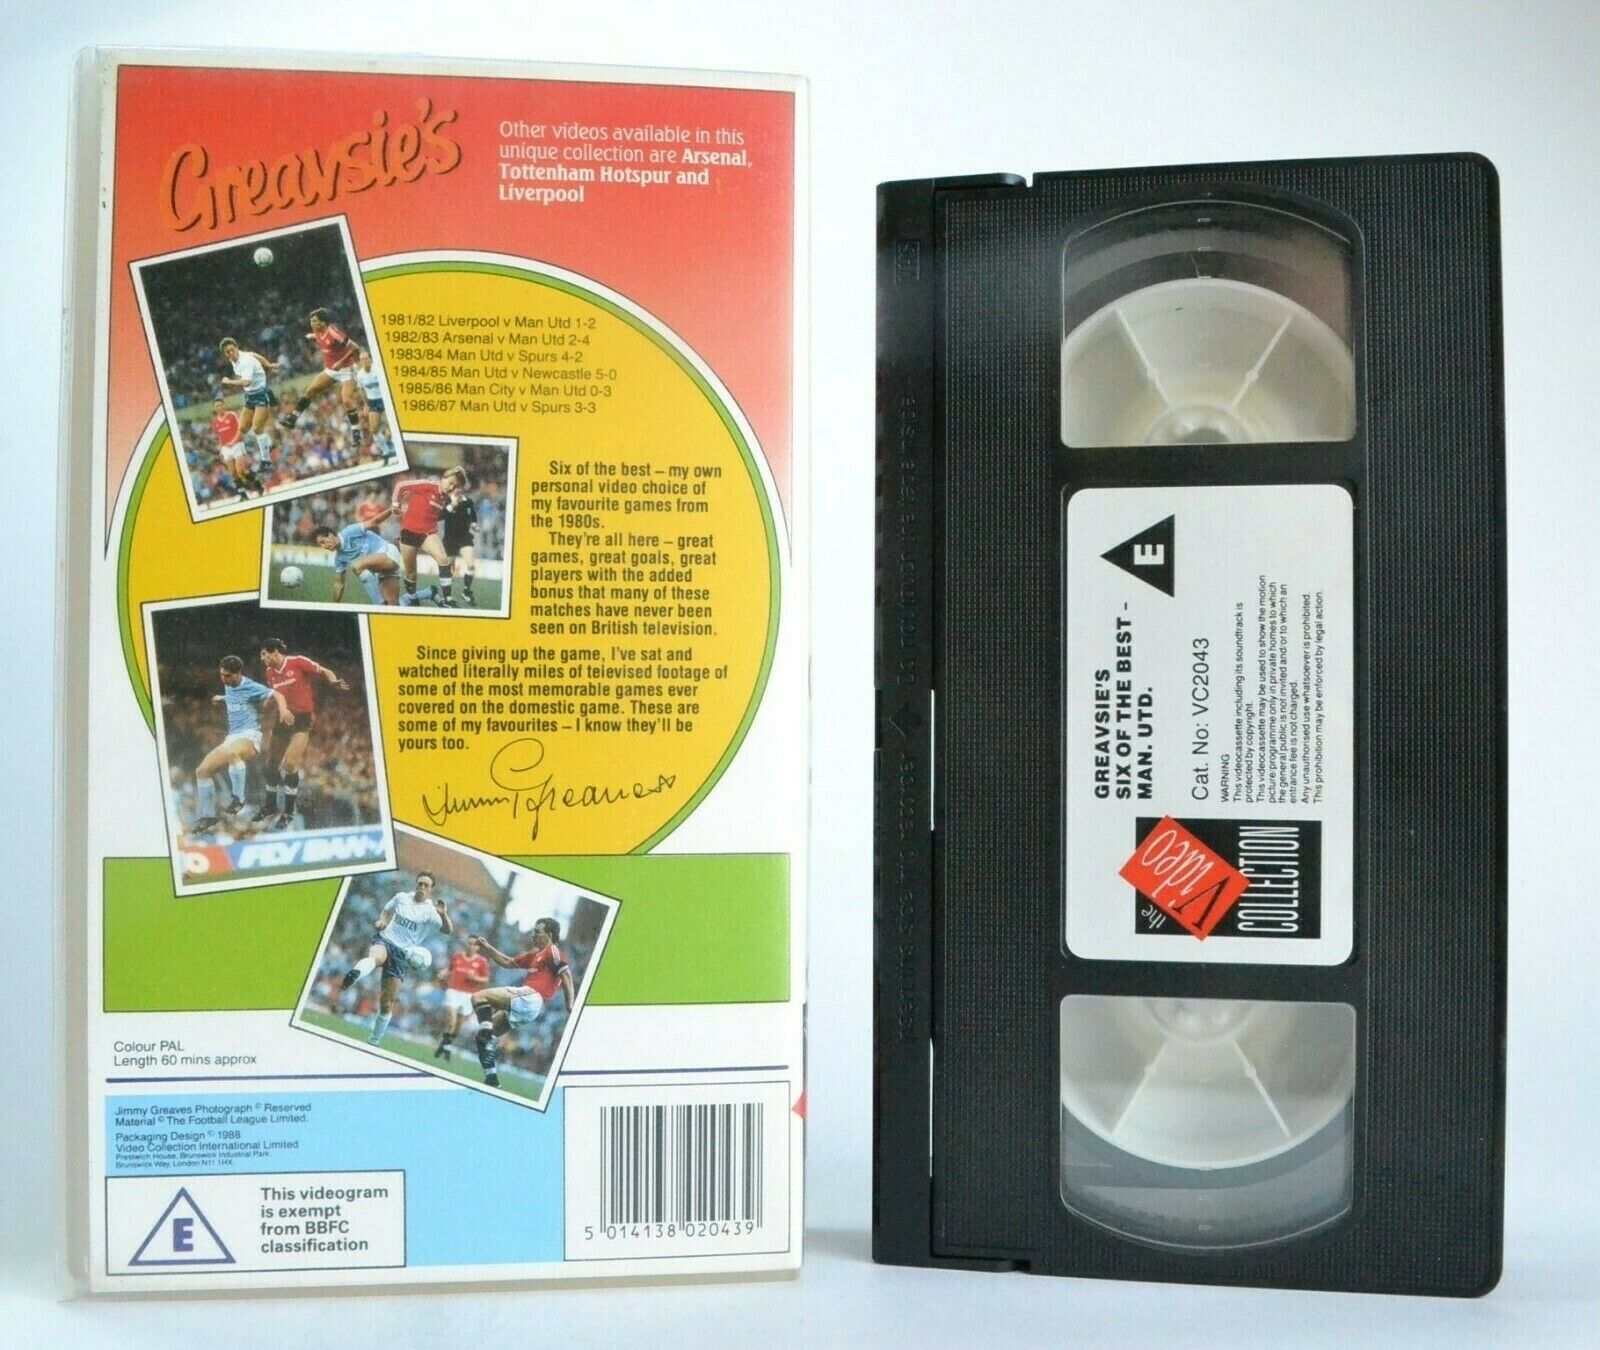 Manchester United: 6 Of The Best Matches From The 80's - Football - Sports - VHS-